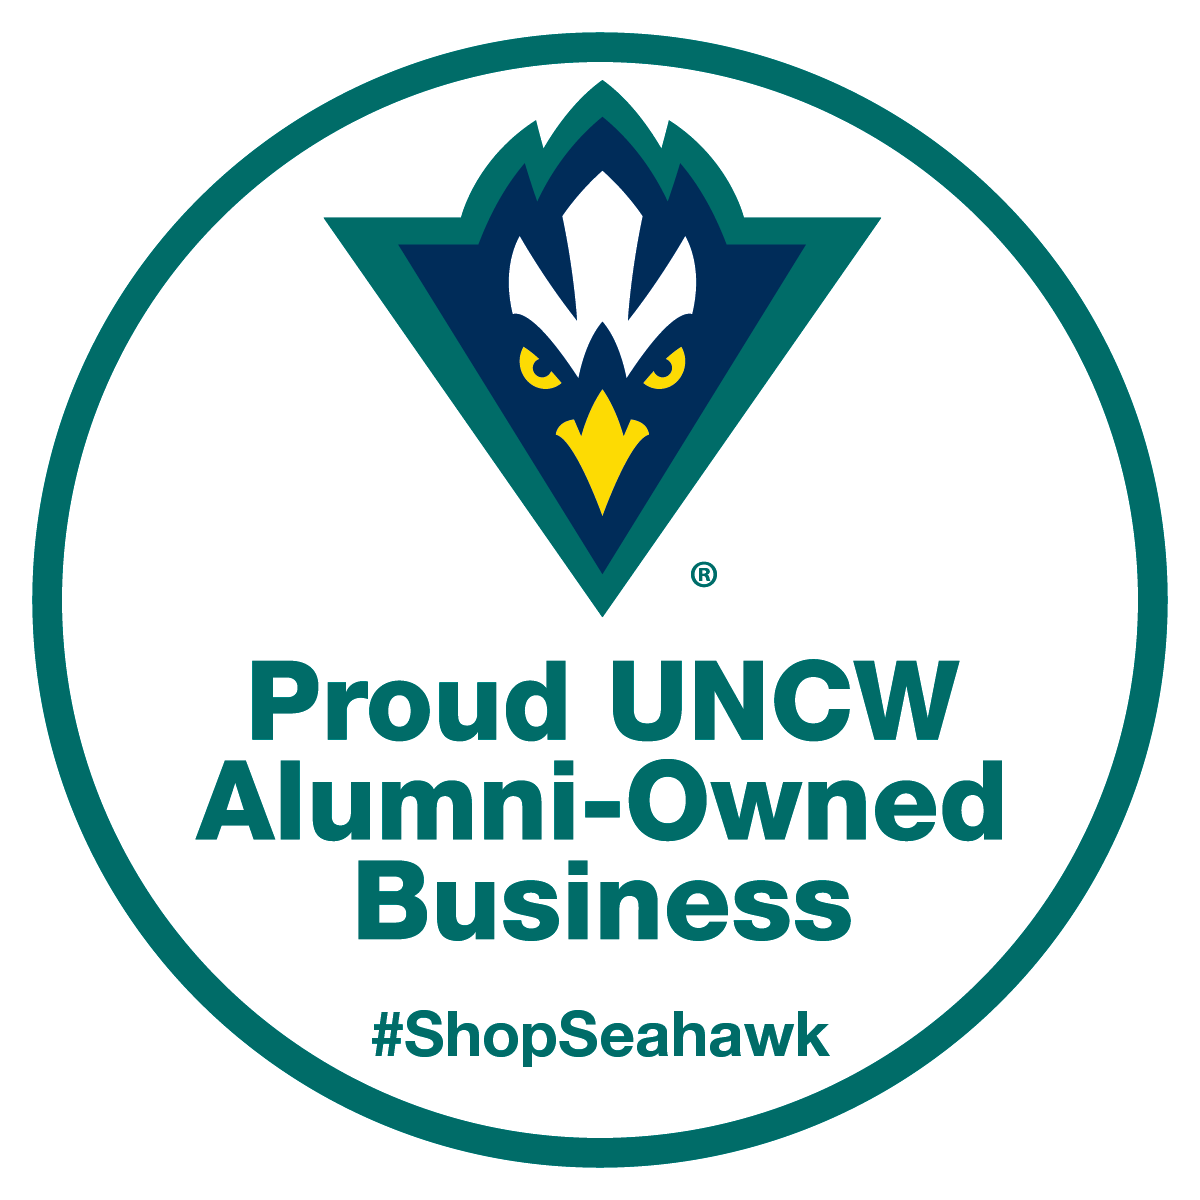 Proud UNCW Alumni-Owned Business #ShopSeahawk decal